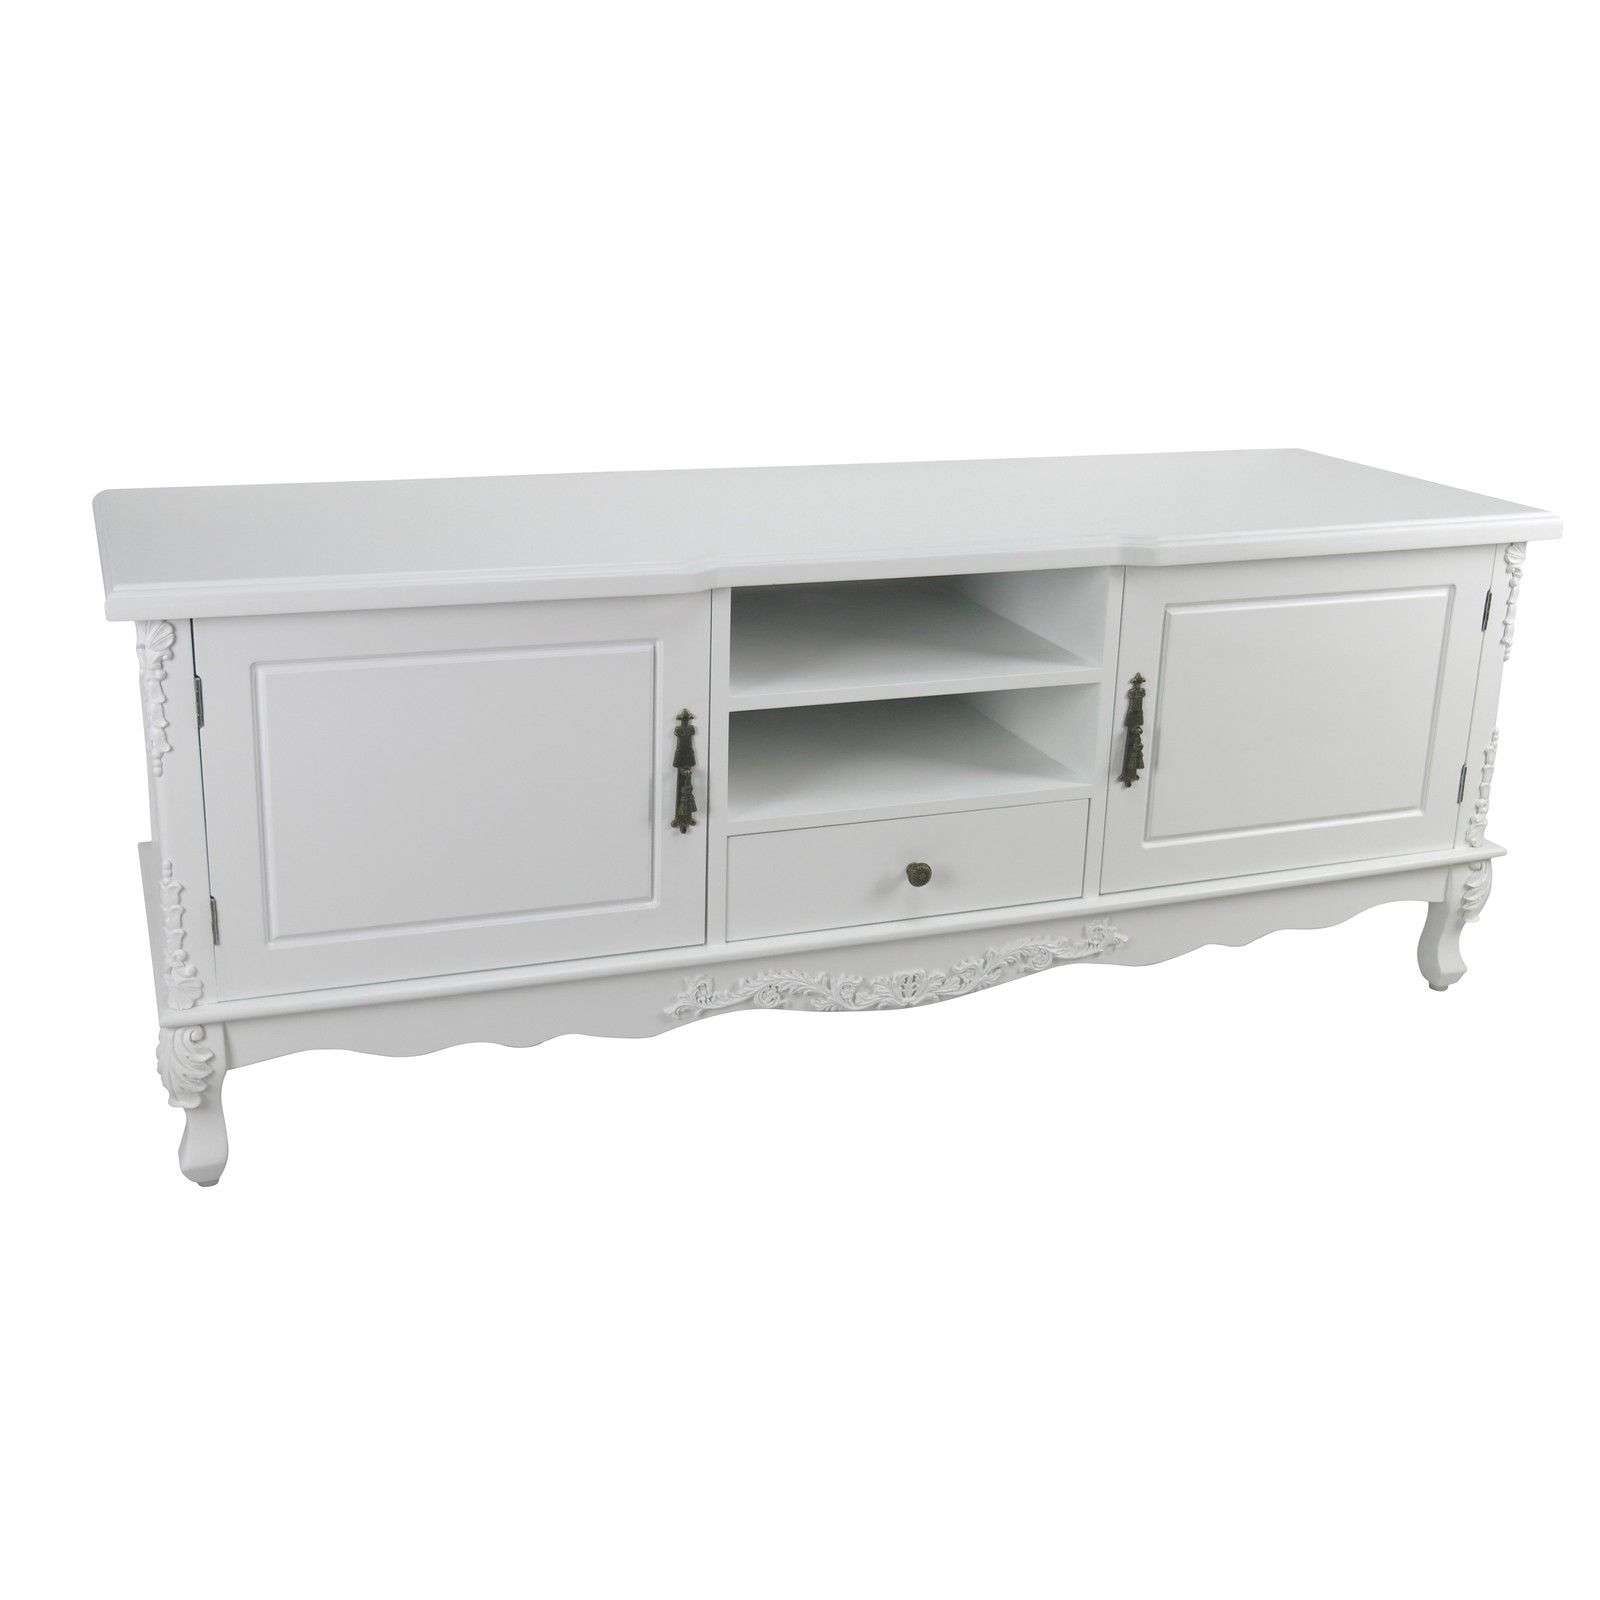 French Style White Large Cabinet Tv Unit Furniture – La Maison Pertaining To French Style Tv Cabinets (View 7 of 20)